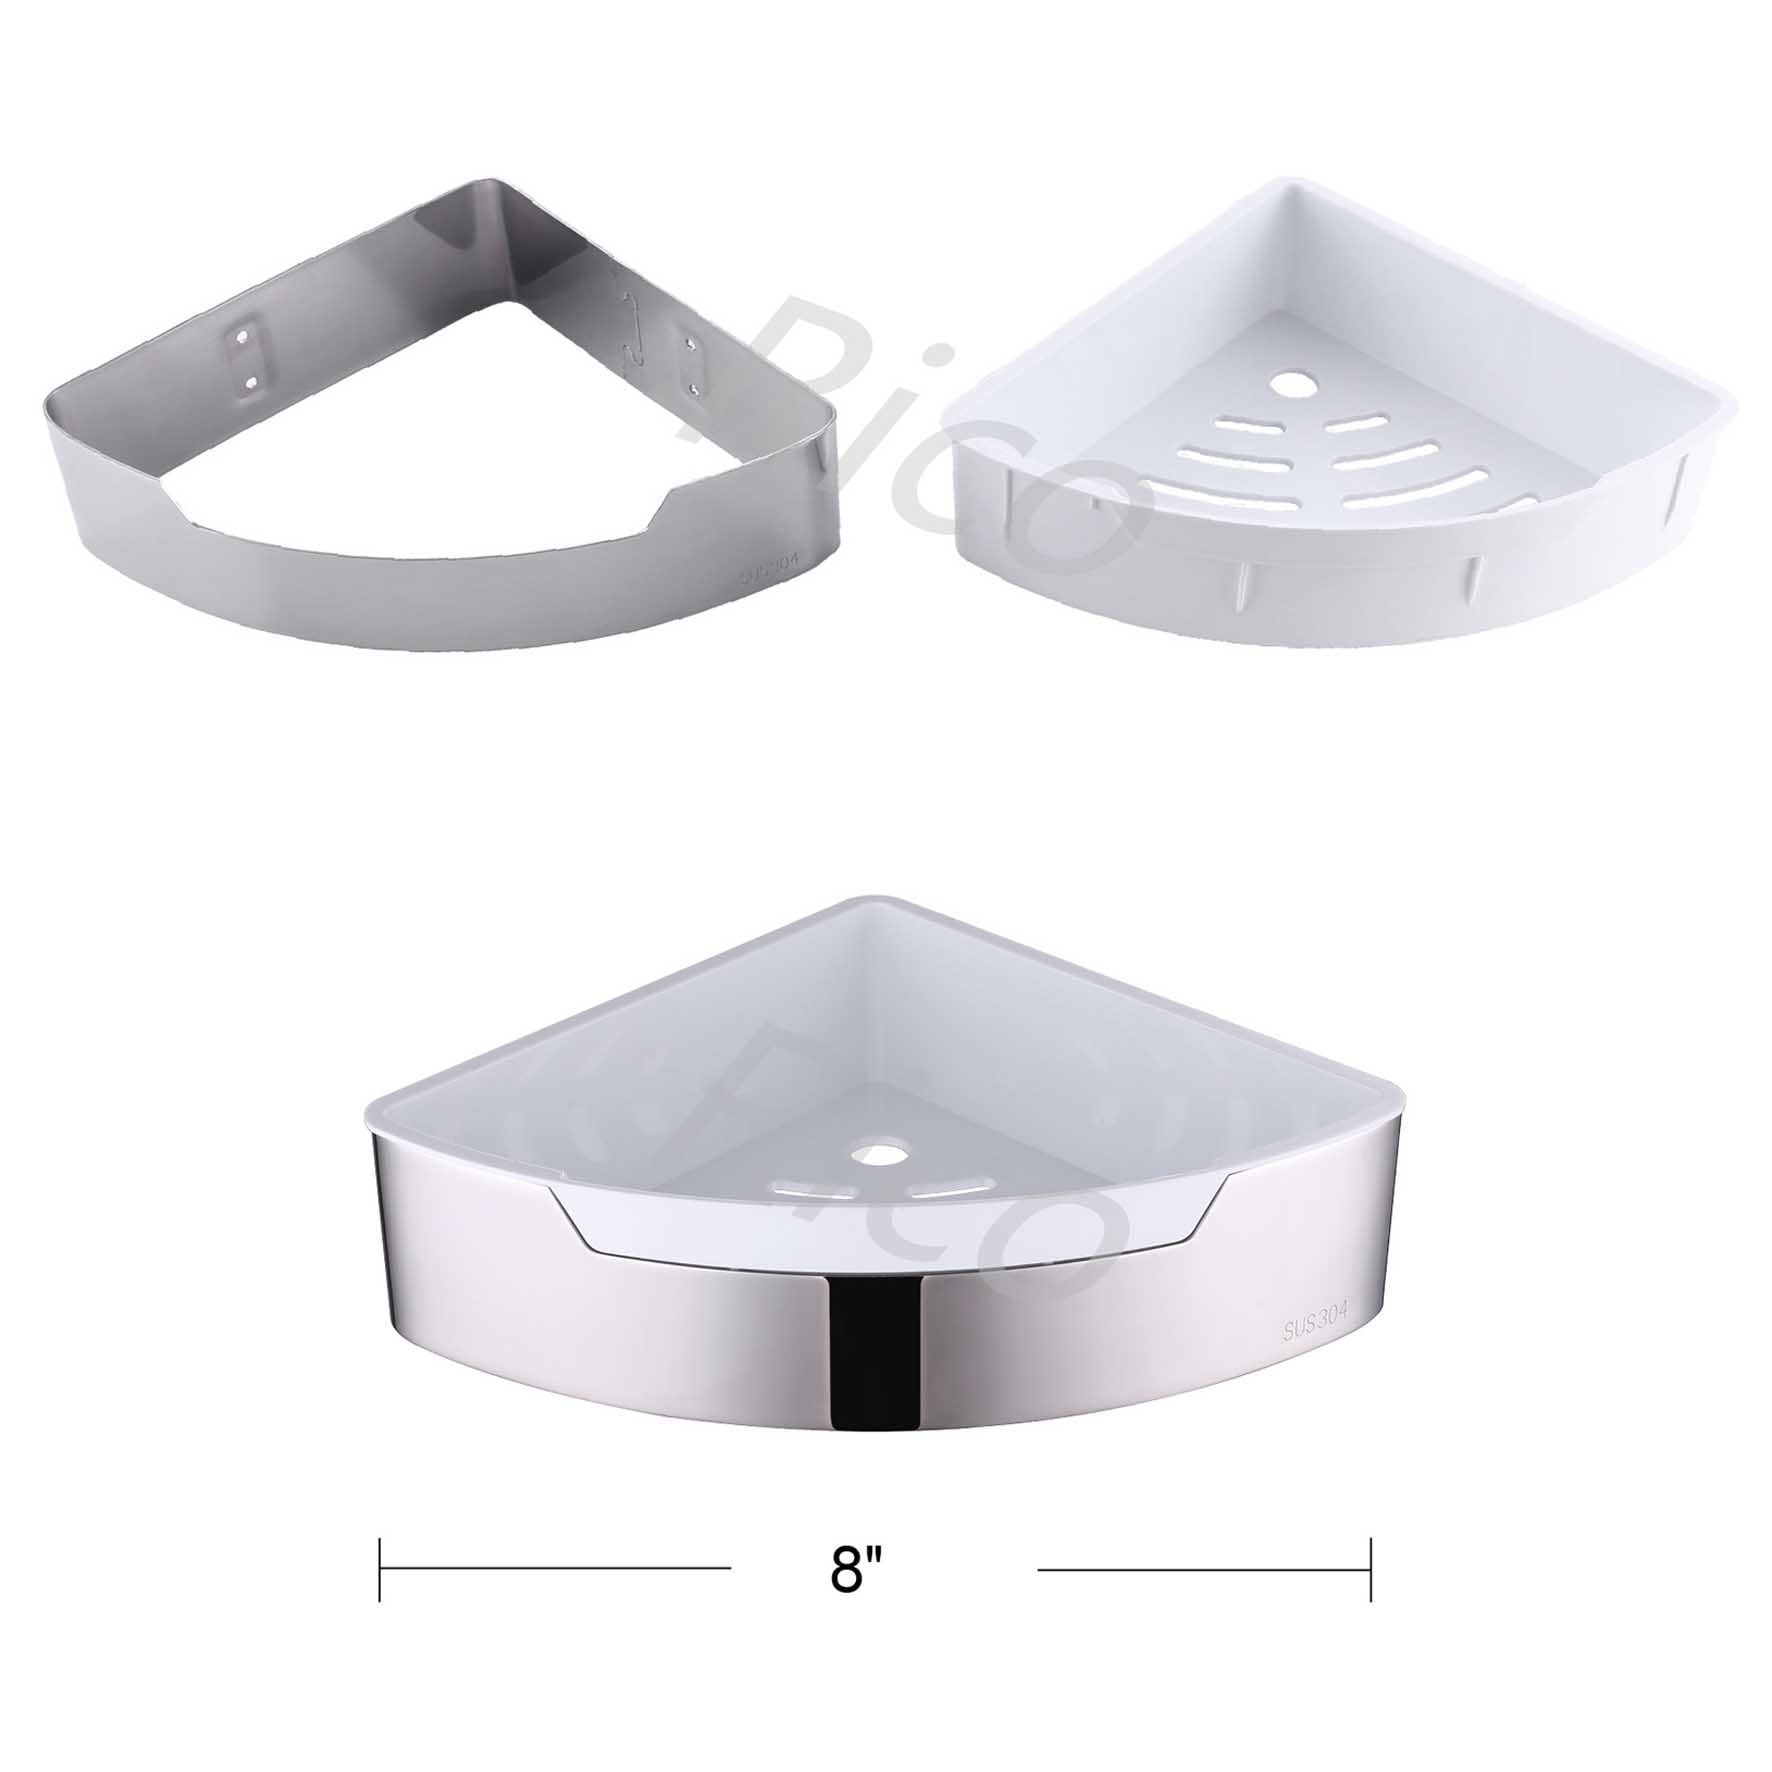 Rico : Stainless Steel Soap Basket – RICO-B11827